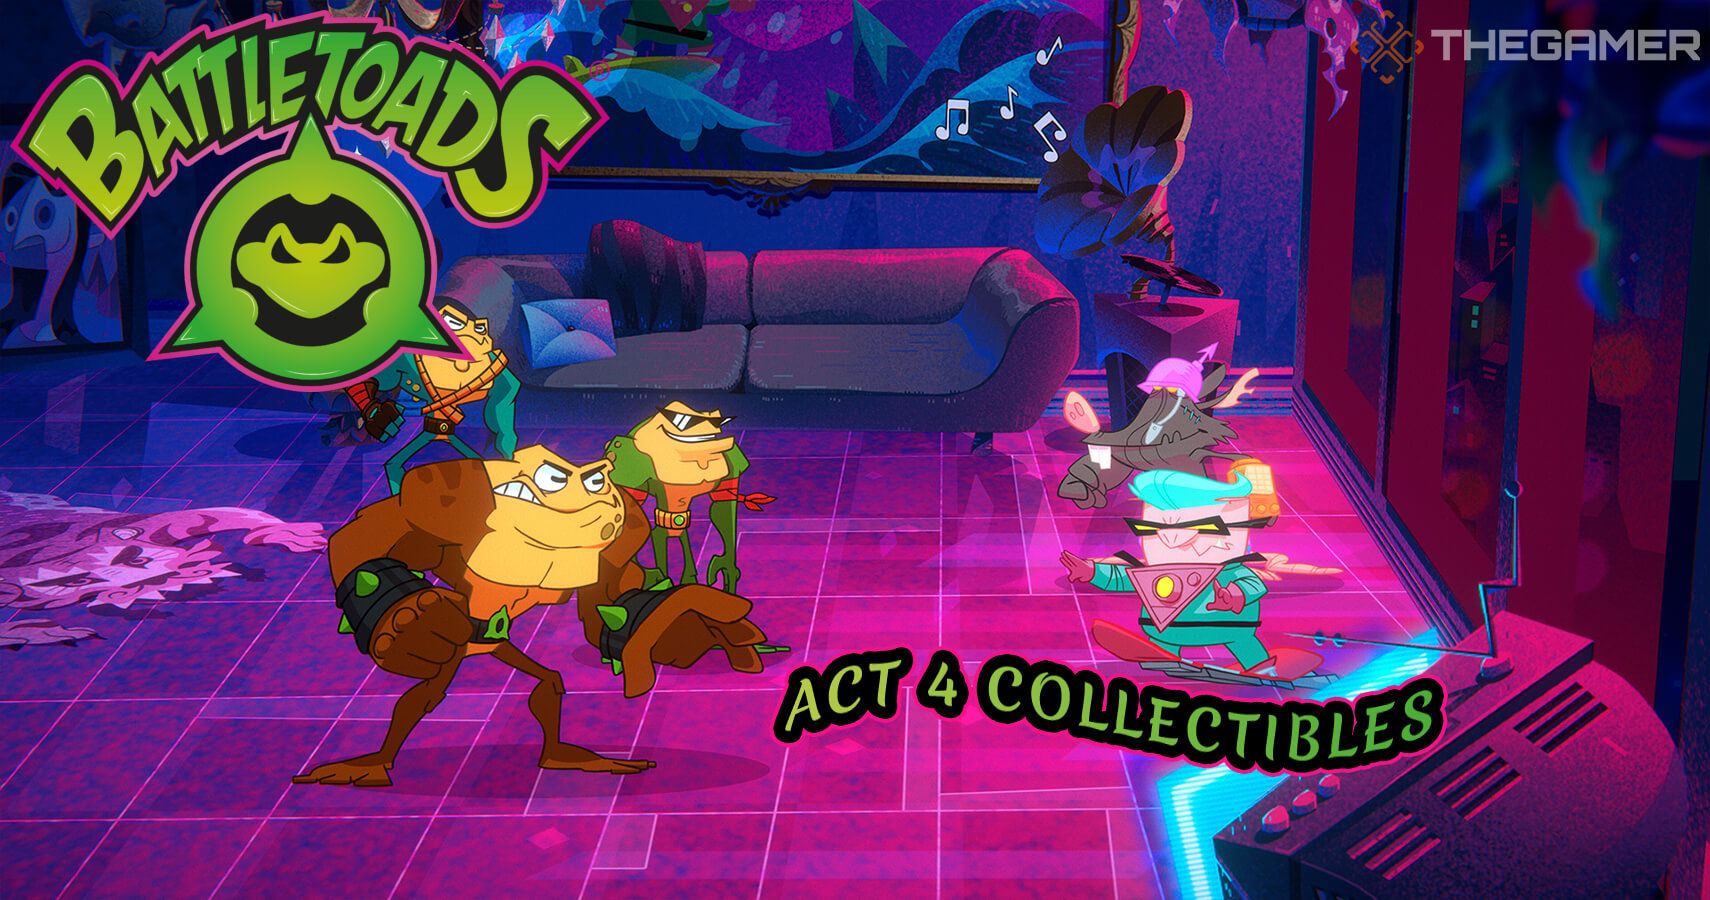 Battletoads All Act 4 Collectible Locations